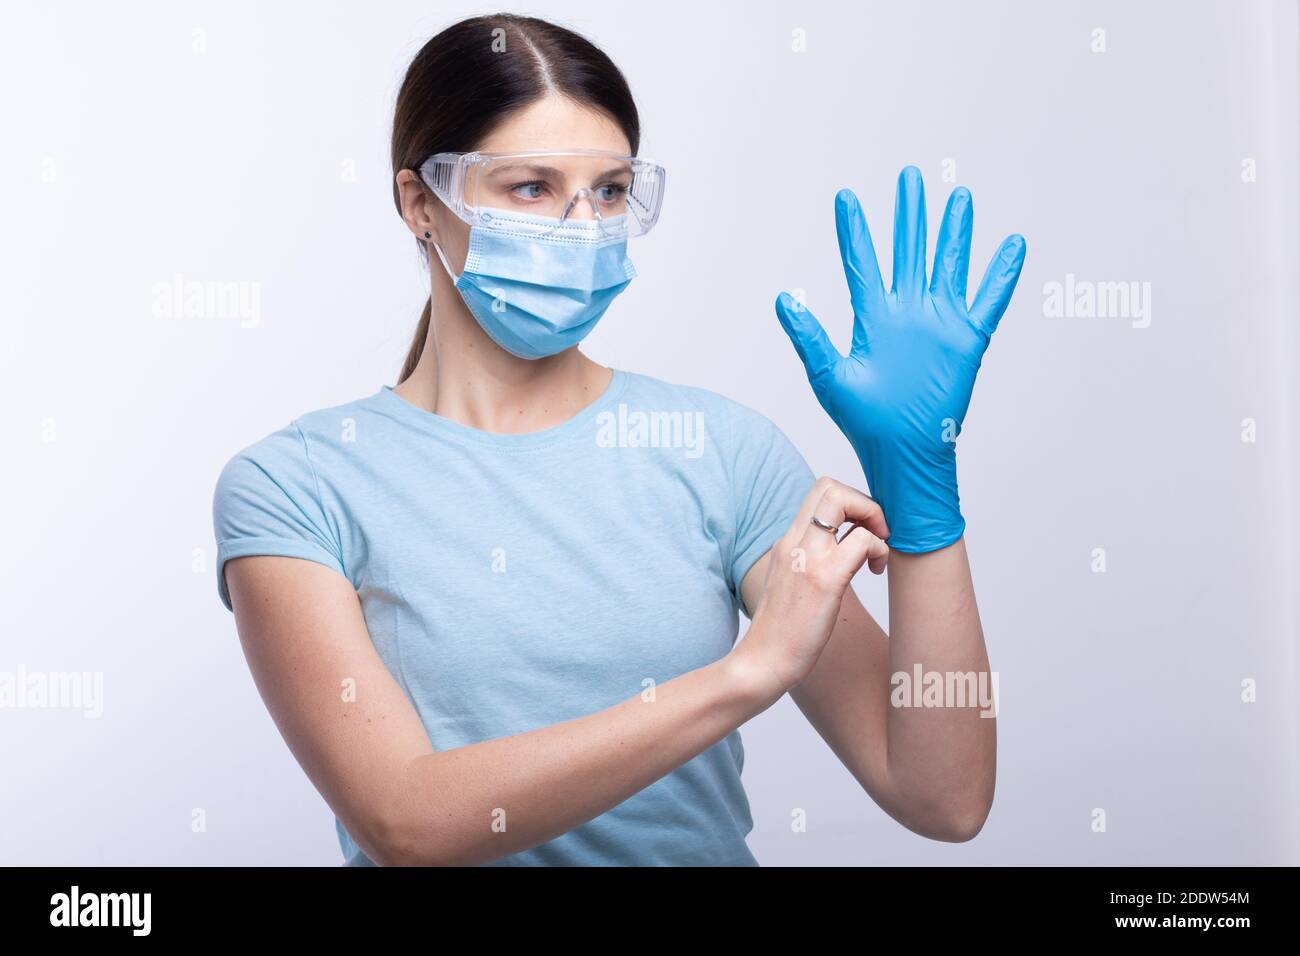 Nurse or doctor wearing and checking protective equipment against viruses and bacterial disease stock photo Stock Photo